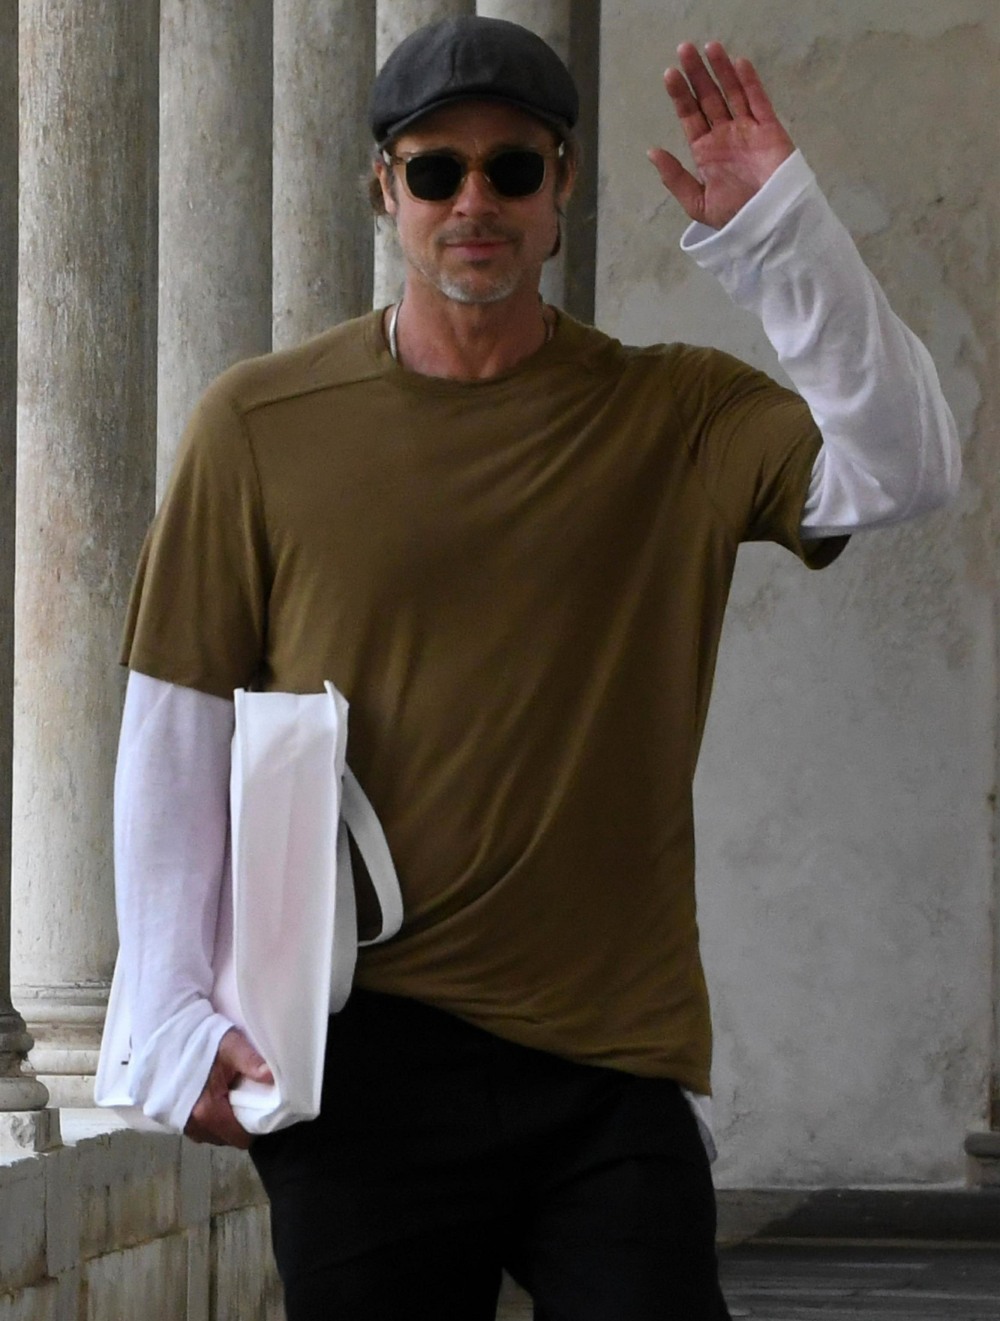 Brad Pitt is seen out visiting the Biennale in Venice